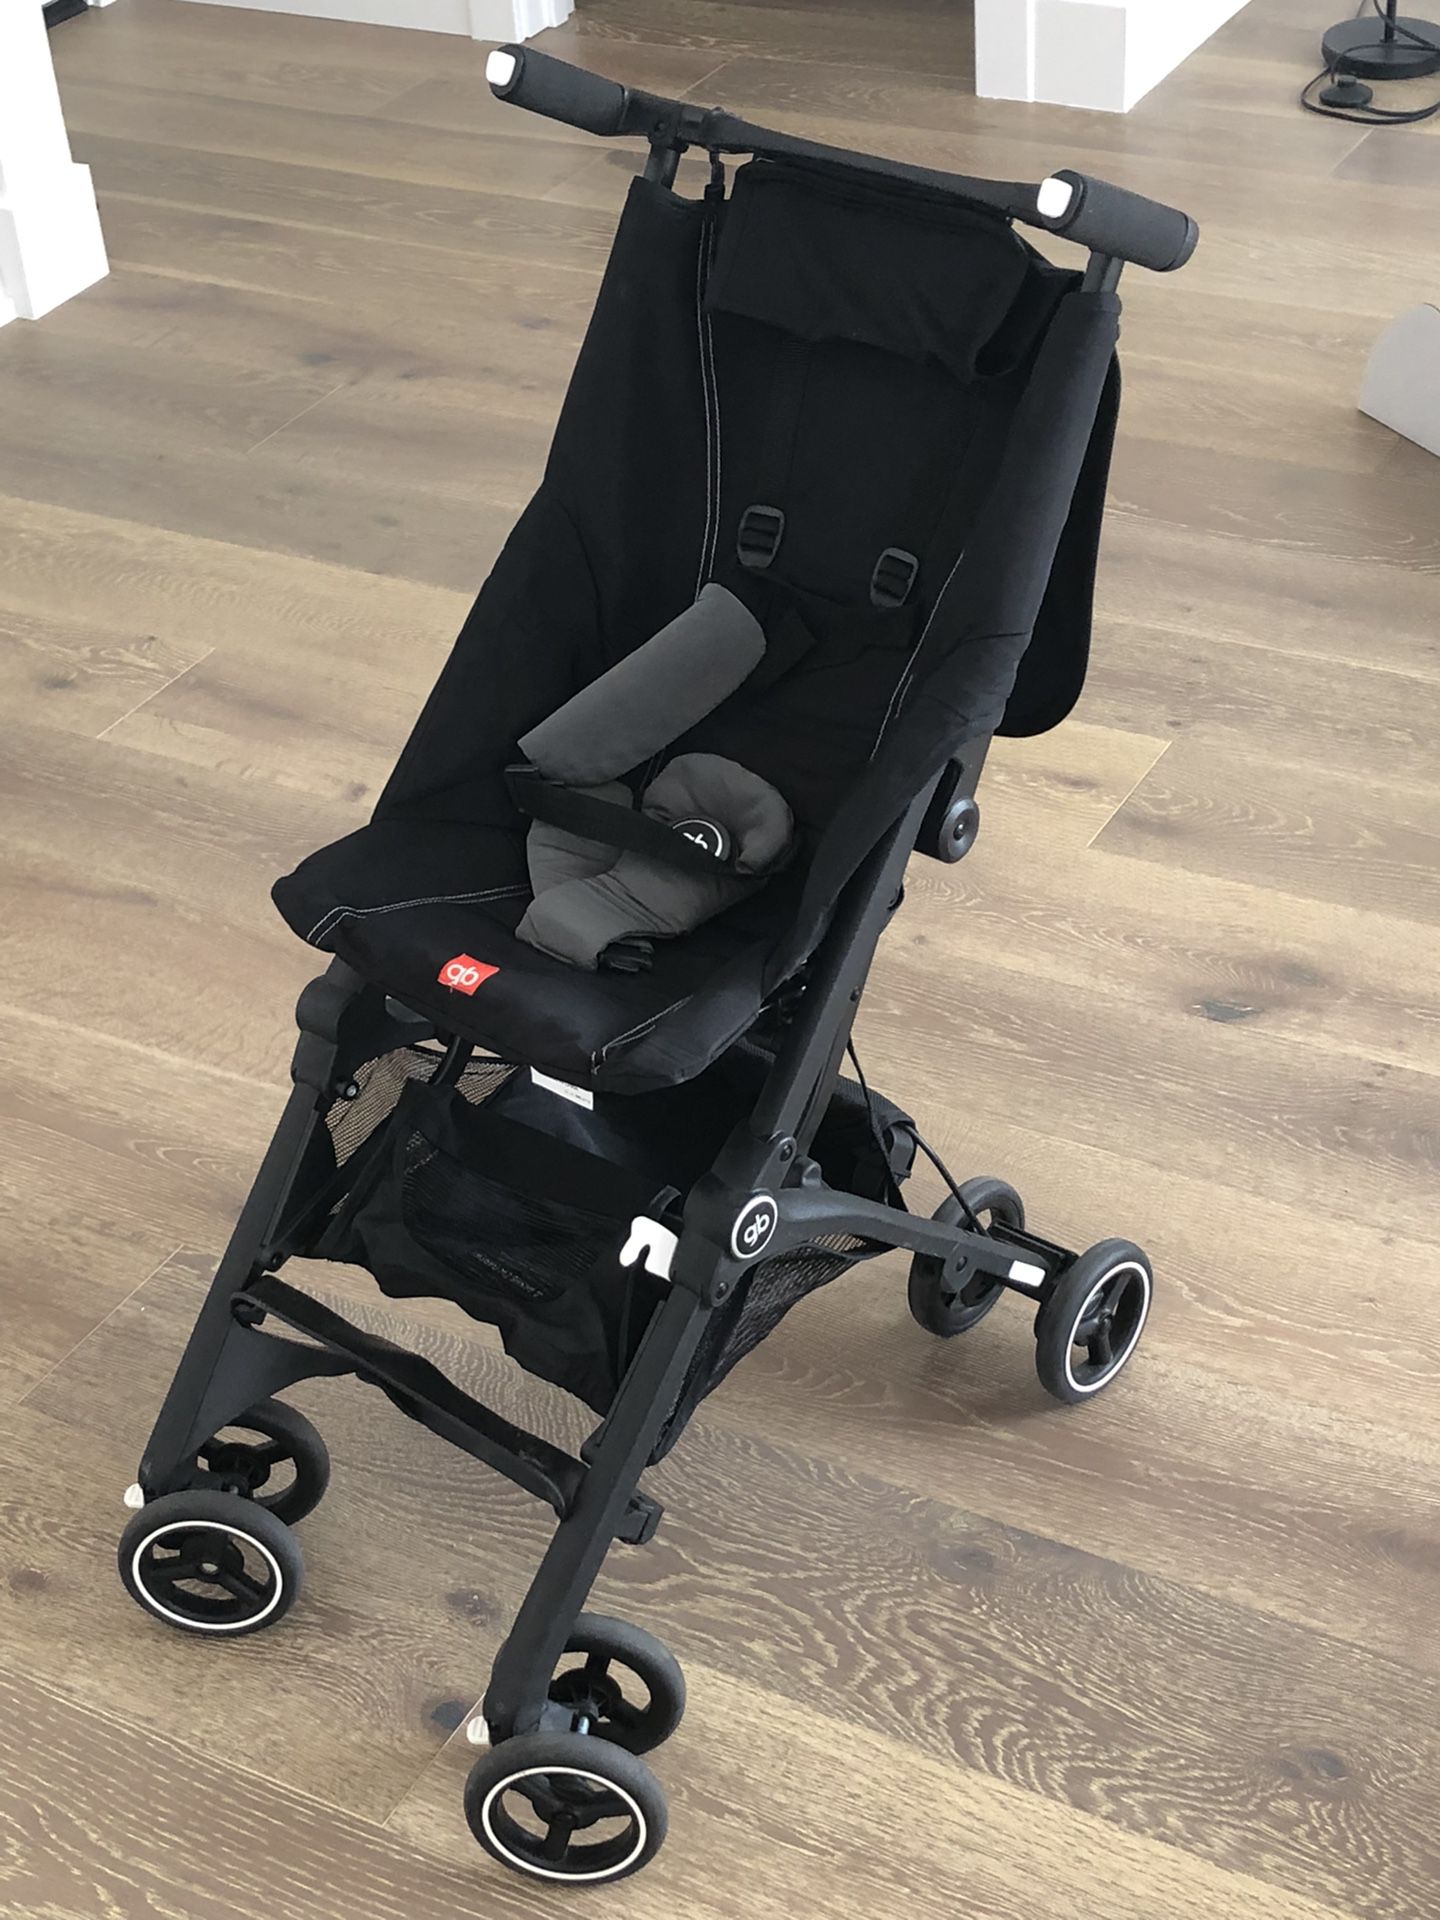 Compact Travel Stroller With Canopy